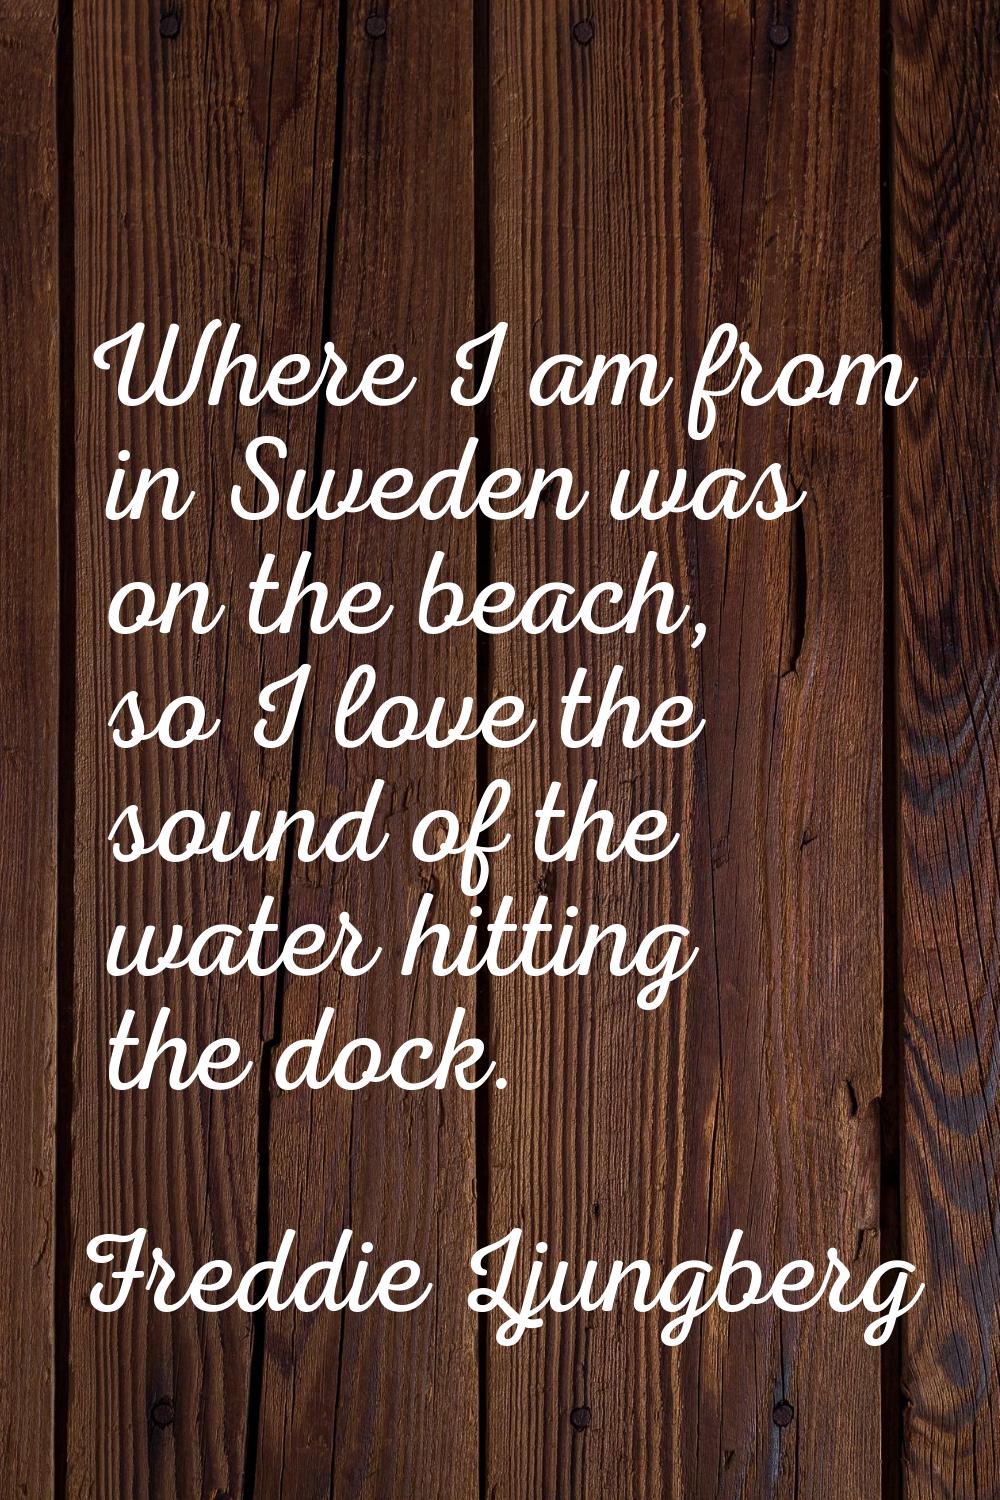 Where I am from in Sweden was on the beach, so I love the sound of the water hitting the dock.